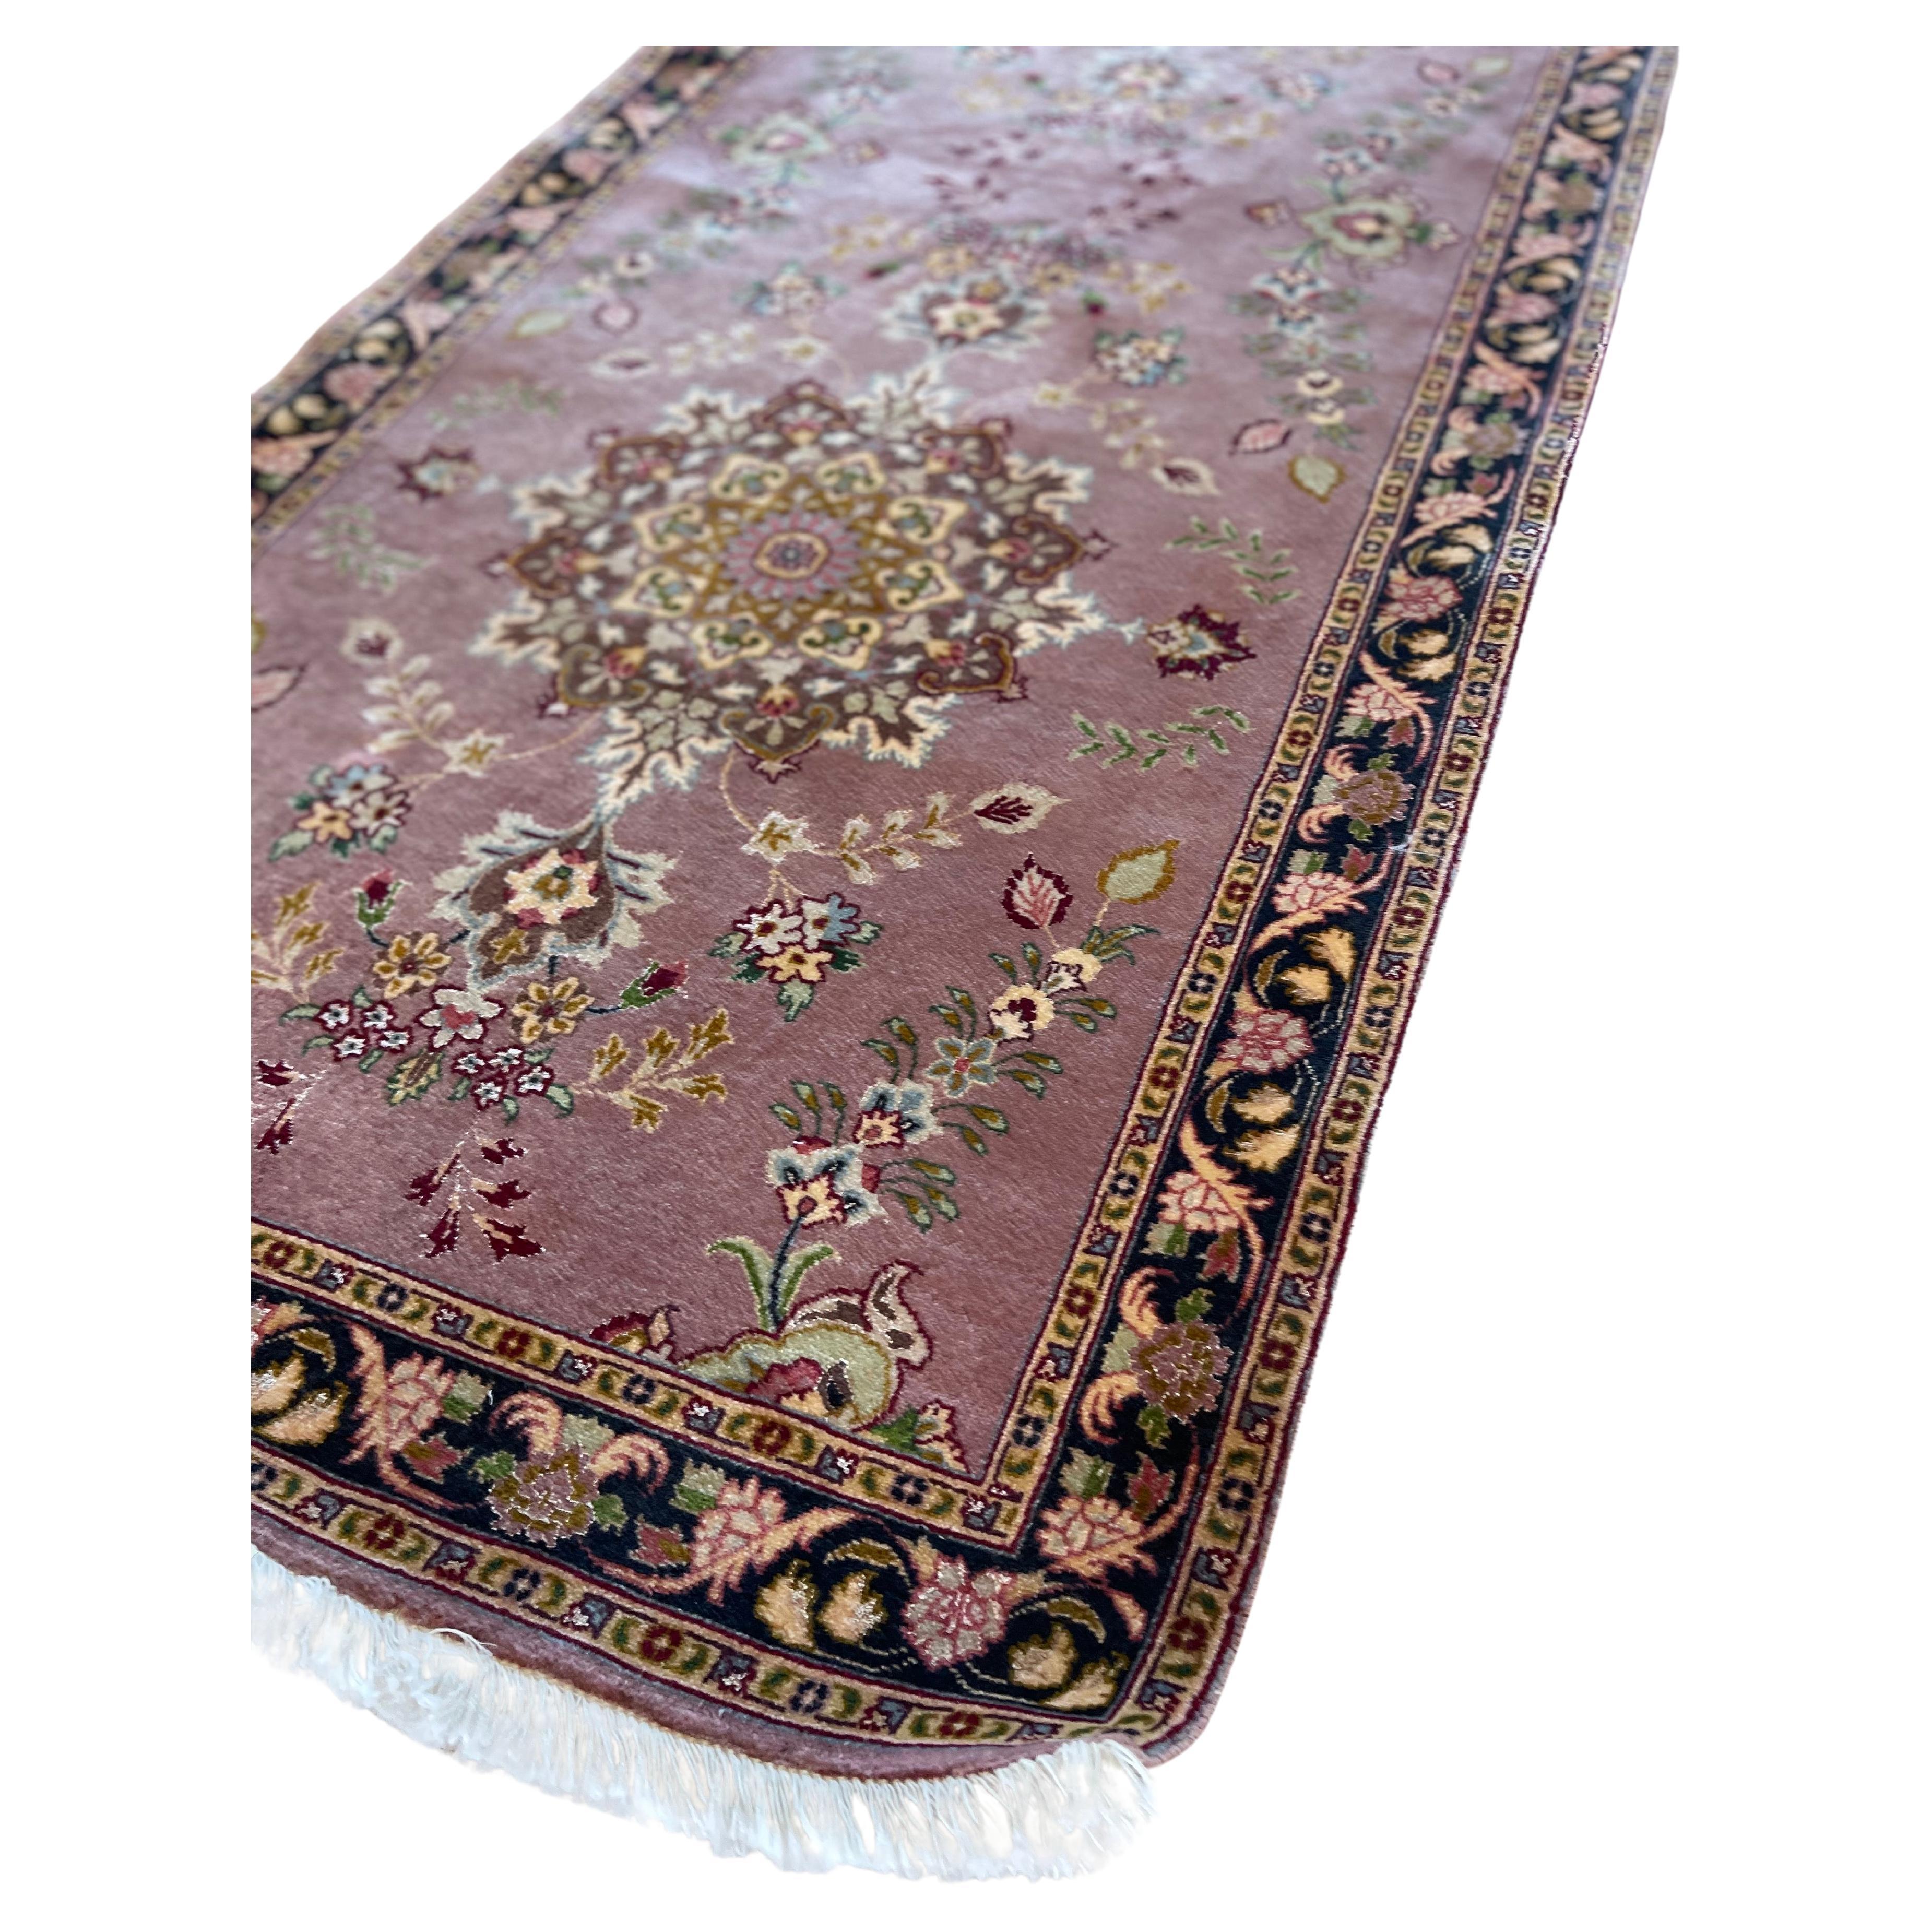 Introducing a stunning hand knotted Persian Tabriz runner that epitomizes quality craftsmanship and timeless beauty. Featuring an enchanting medallion floral design, this rug captivates with its unique blend of colors and patterns. The combination